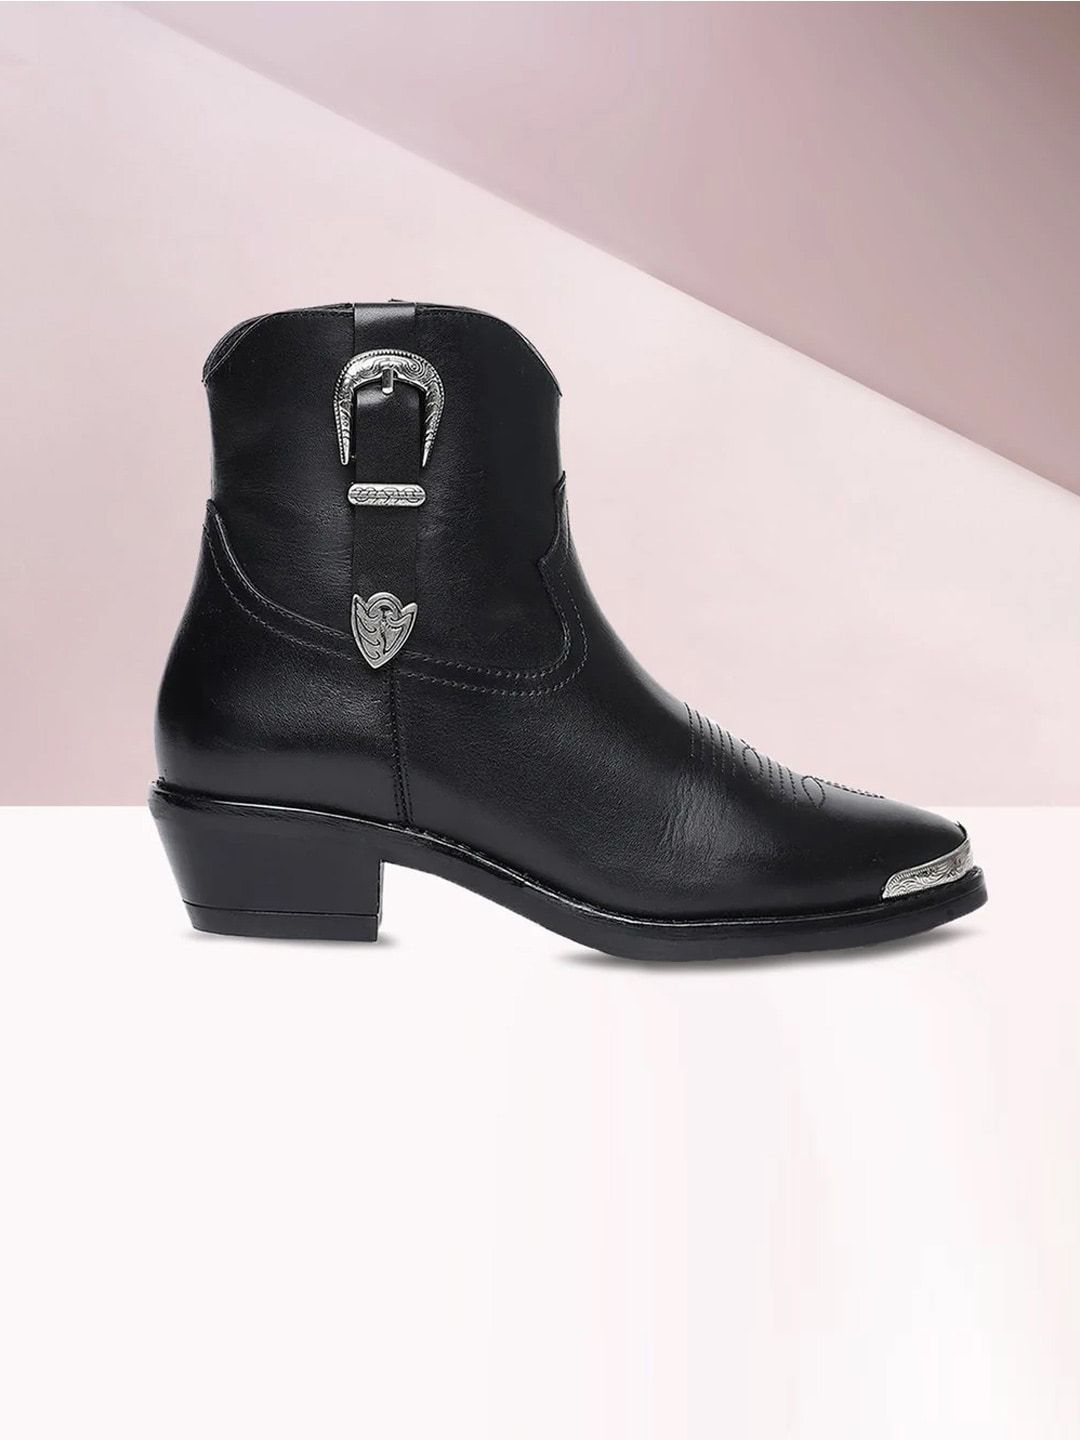 Saint G Women Black Buckle Decorative Leather Ankle Boots Price in India